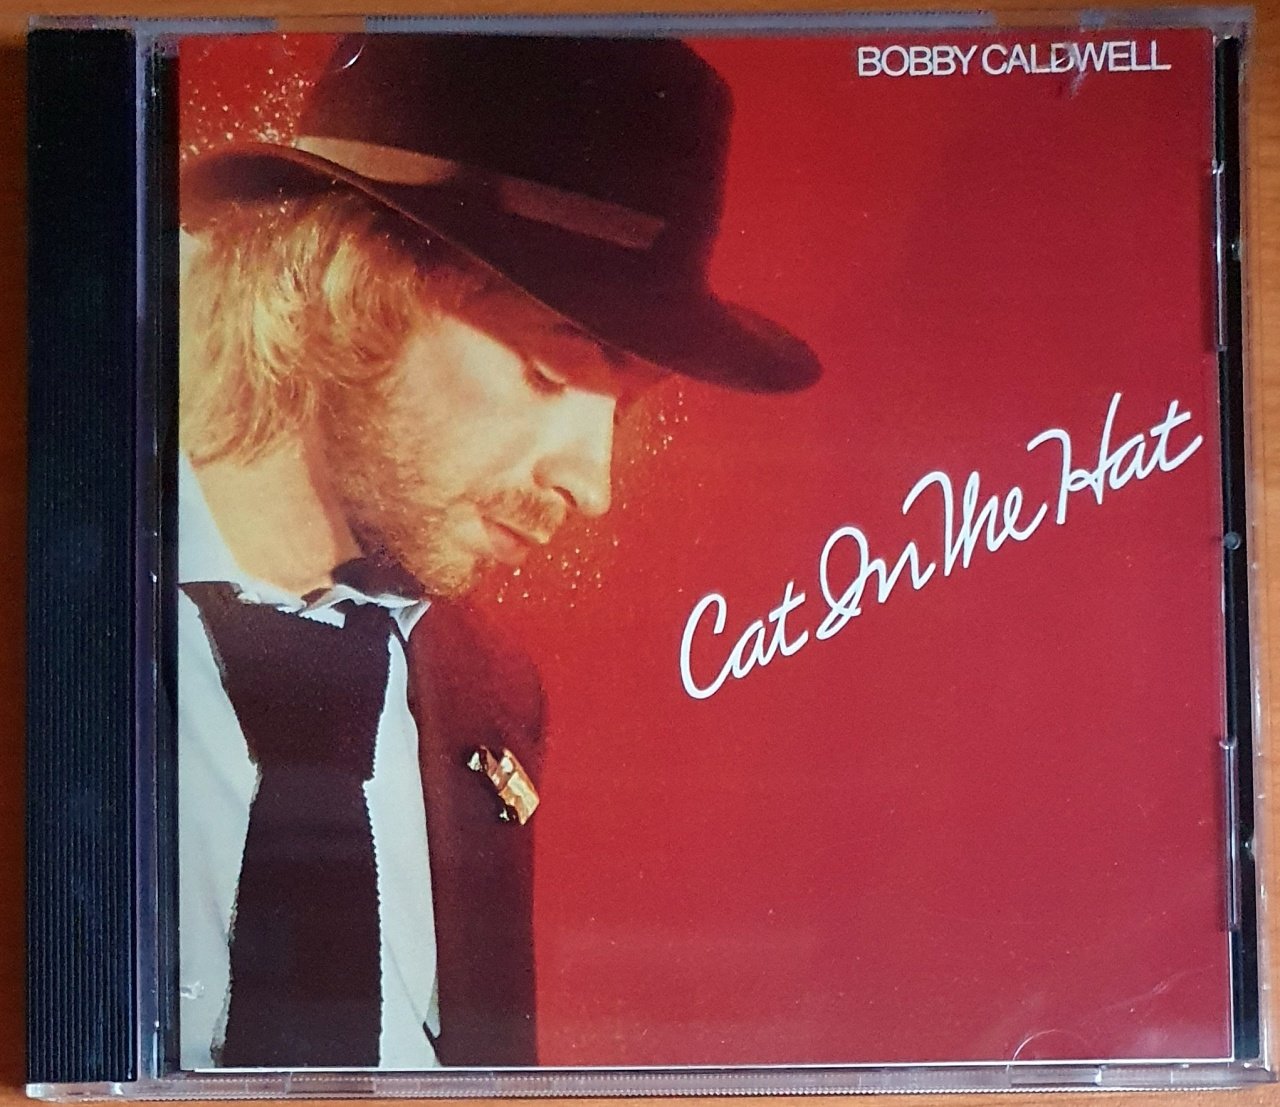 BOBBY CALDWELL - CAT IN THE HAT (1980) - CD SIN-DROME RECORDS 2.EL